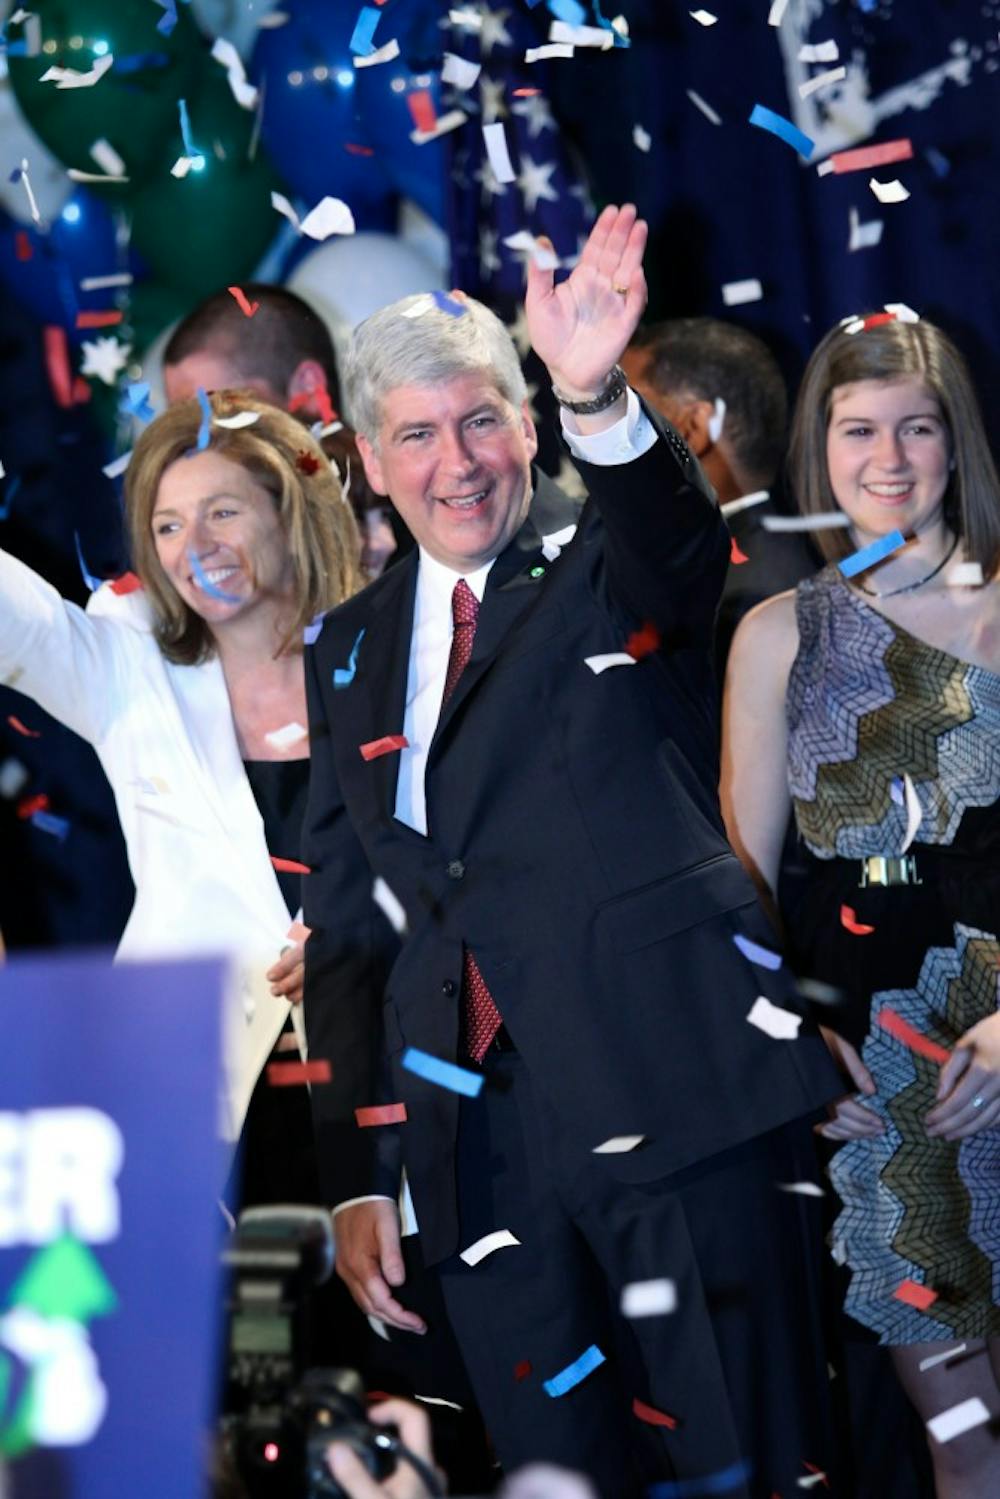 Michigan chooses Snyder as new governor